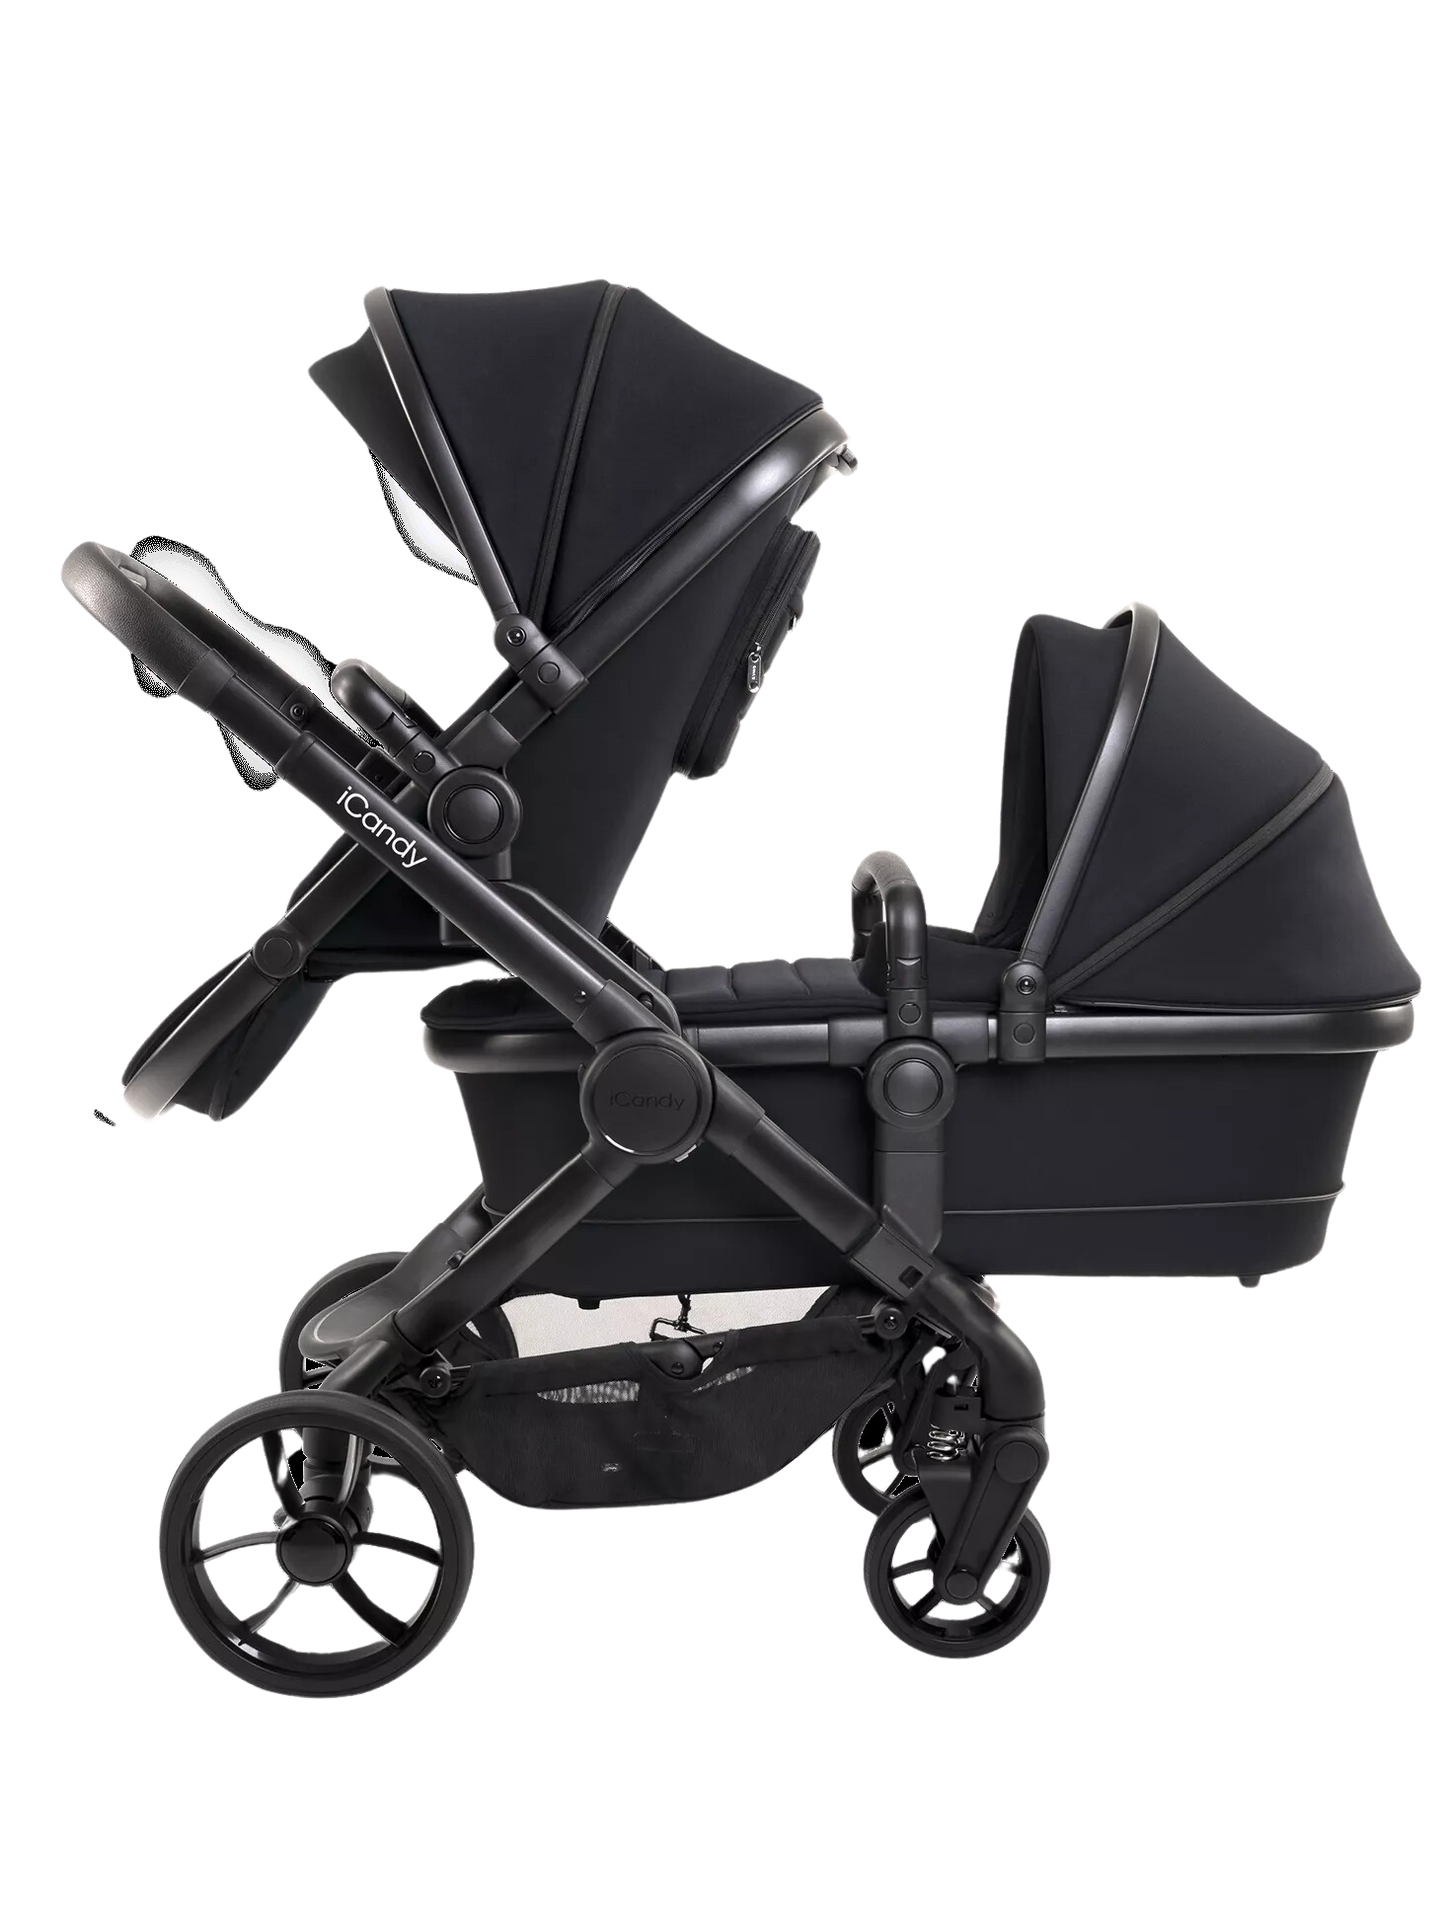 iCandy Peach 7 Double Stroller and Bassinet - Black